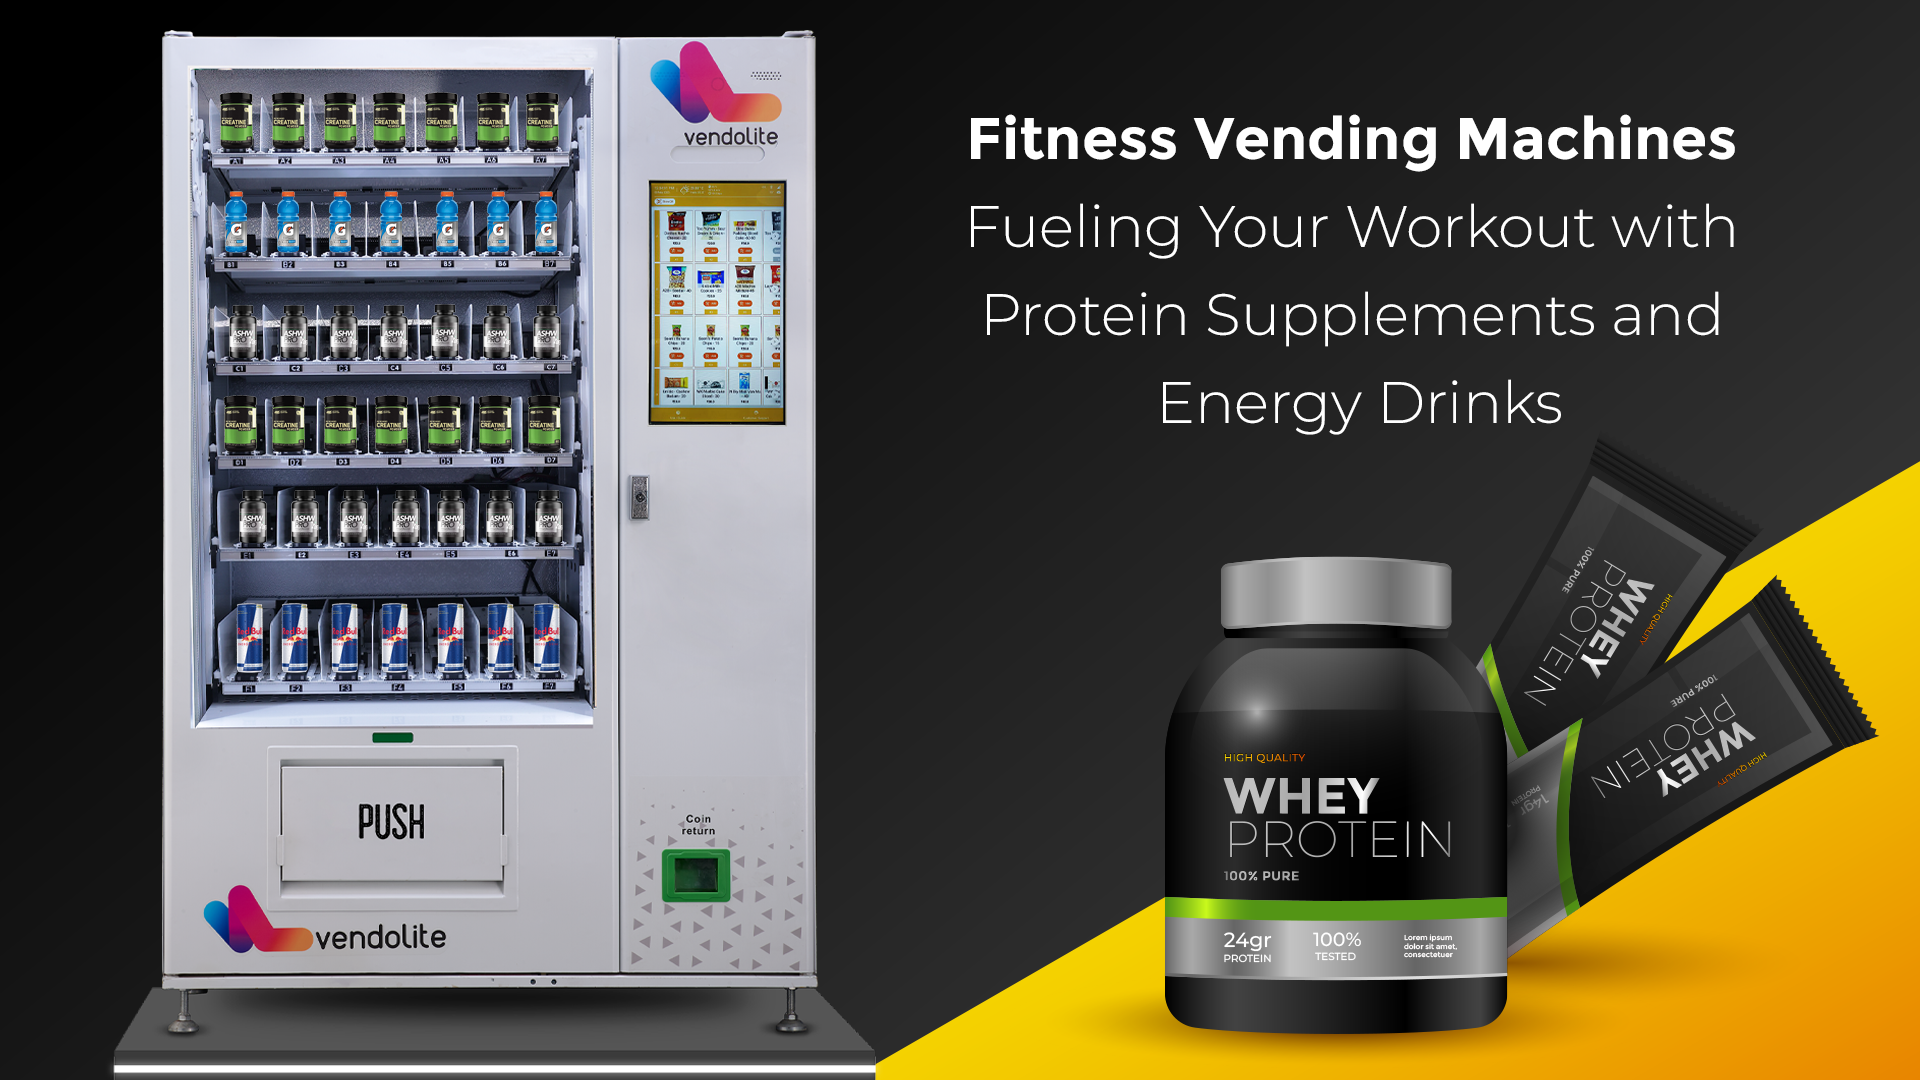 Fitness Vending Machines: Fueling Your Workout with Protein Supplements and Energy Drinks